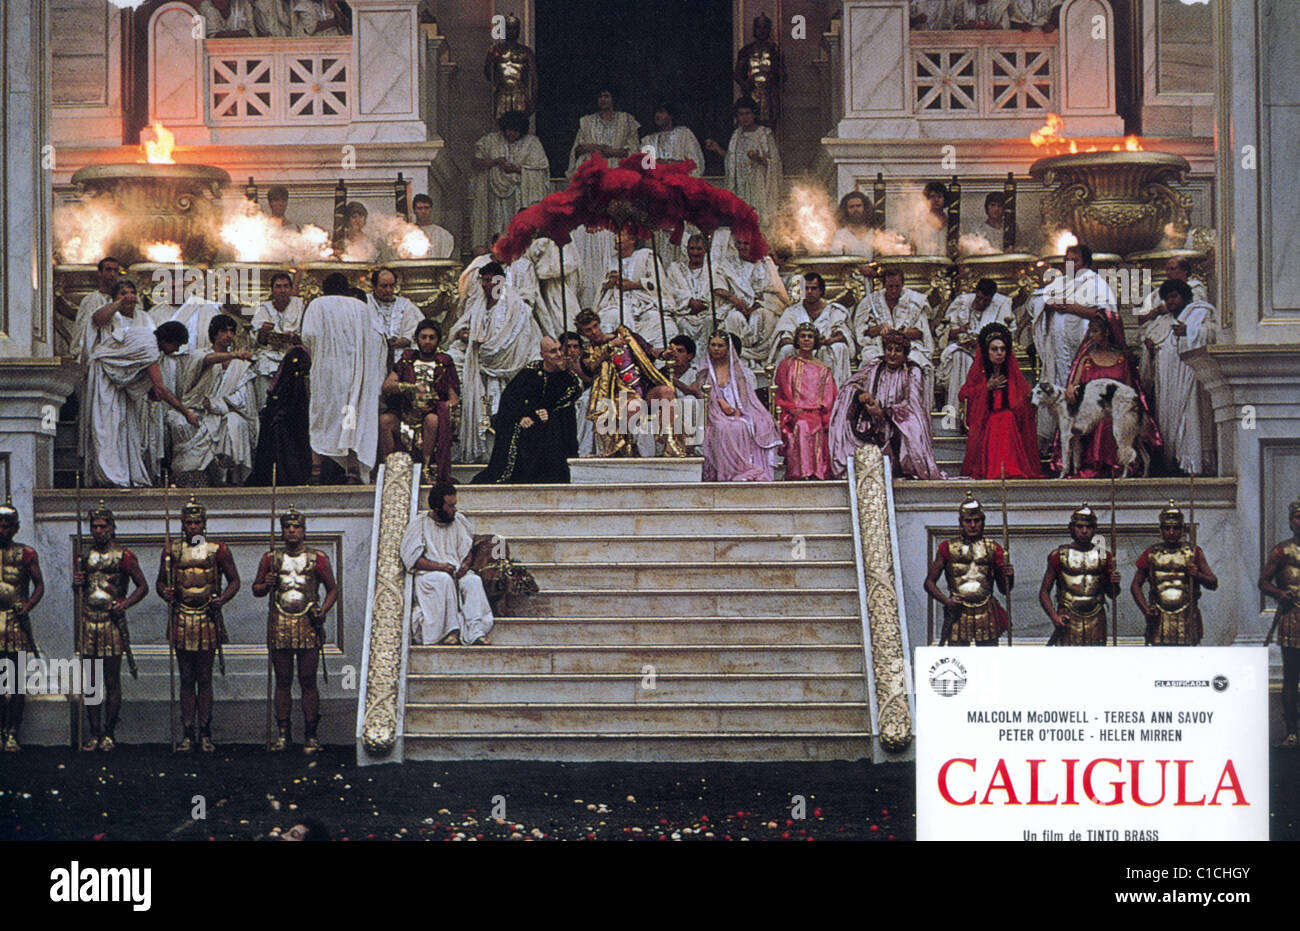 CALIGULA, mon fils (1979) MALCOLM MCDOWELL CLGL FOH COLLECTION MOVIESTORE 011LTD Banque D'Images